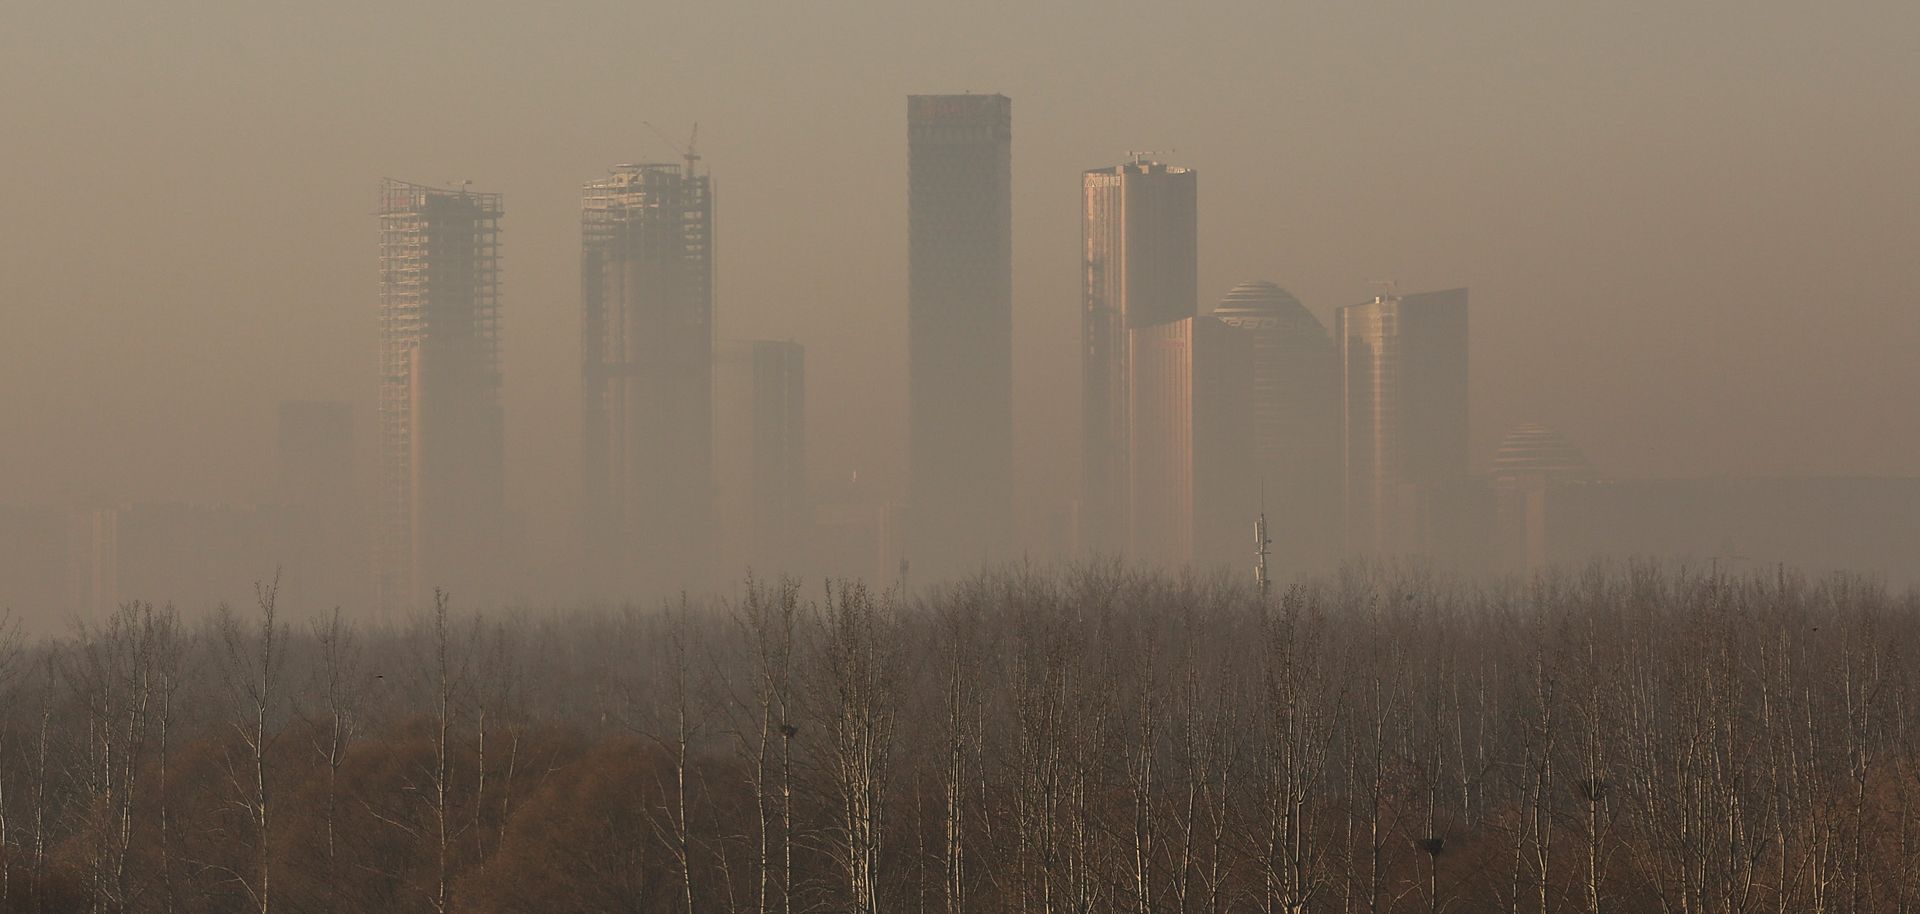 China's central government is increasing its efforts to address the damage that decades of rapid industrialization inflicted on the country's air, water and soil quality.